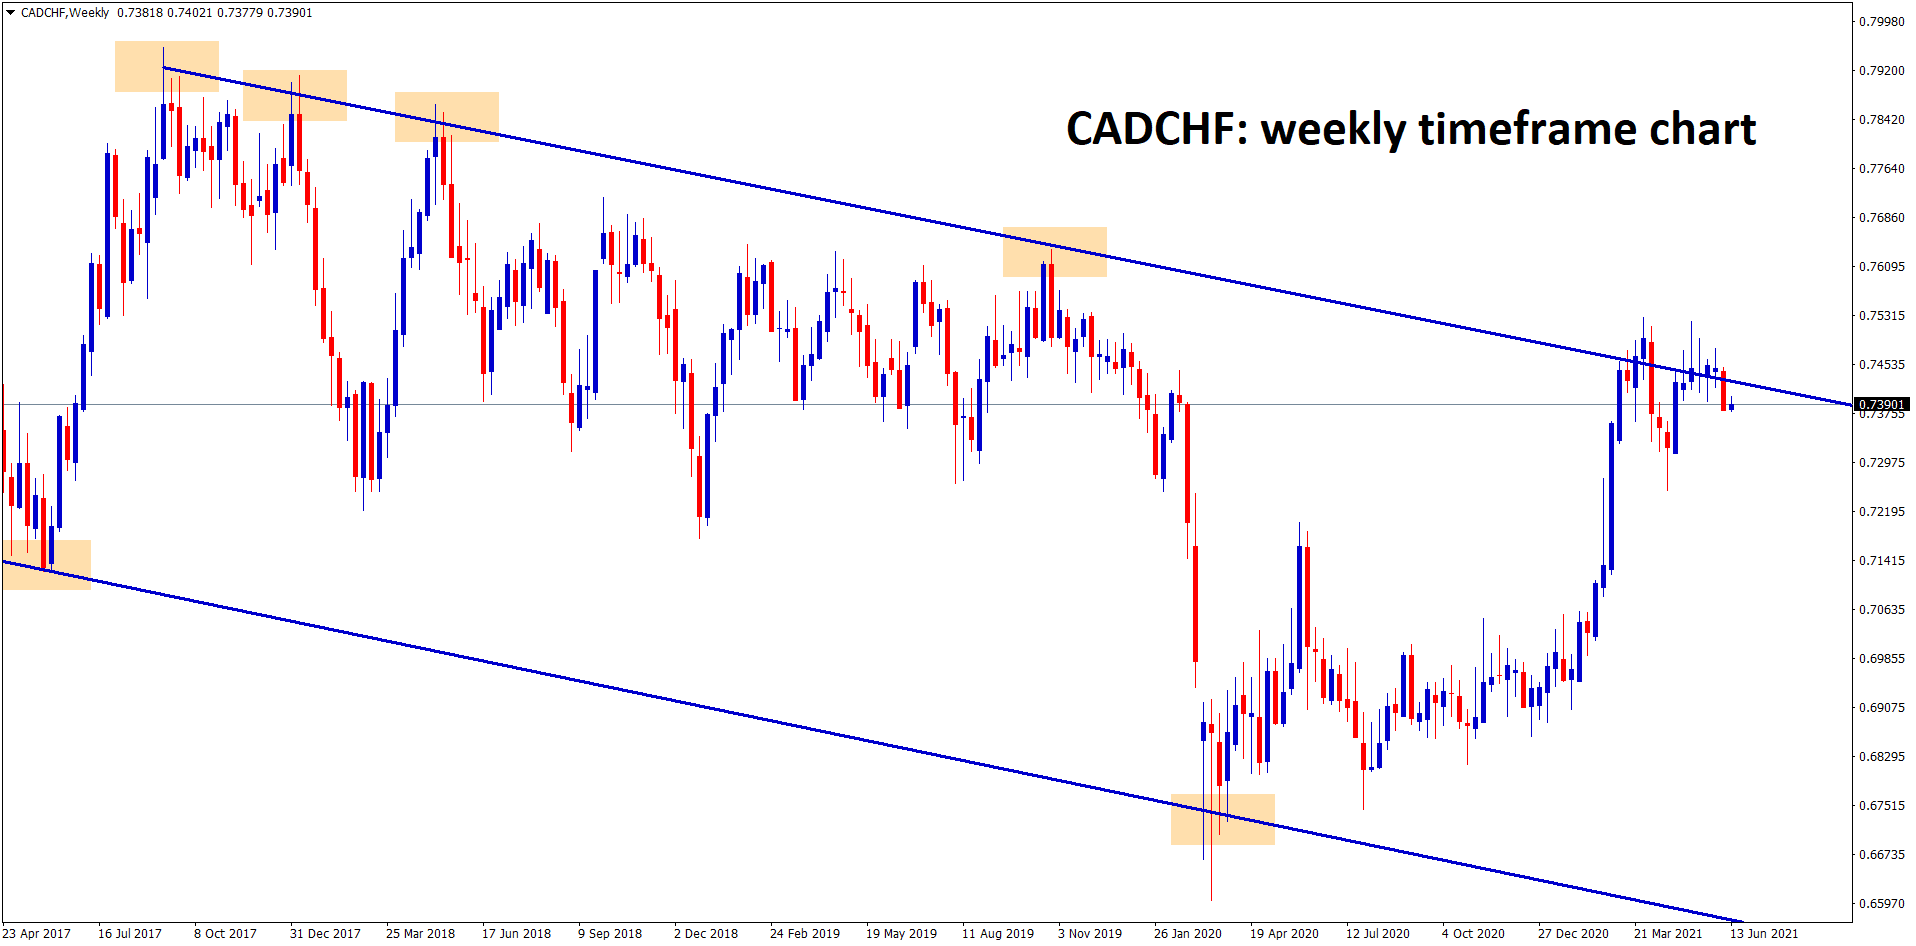 CADCHF in the higher timeframe weekly its the lower high zone of the downtrend line